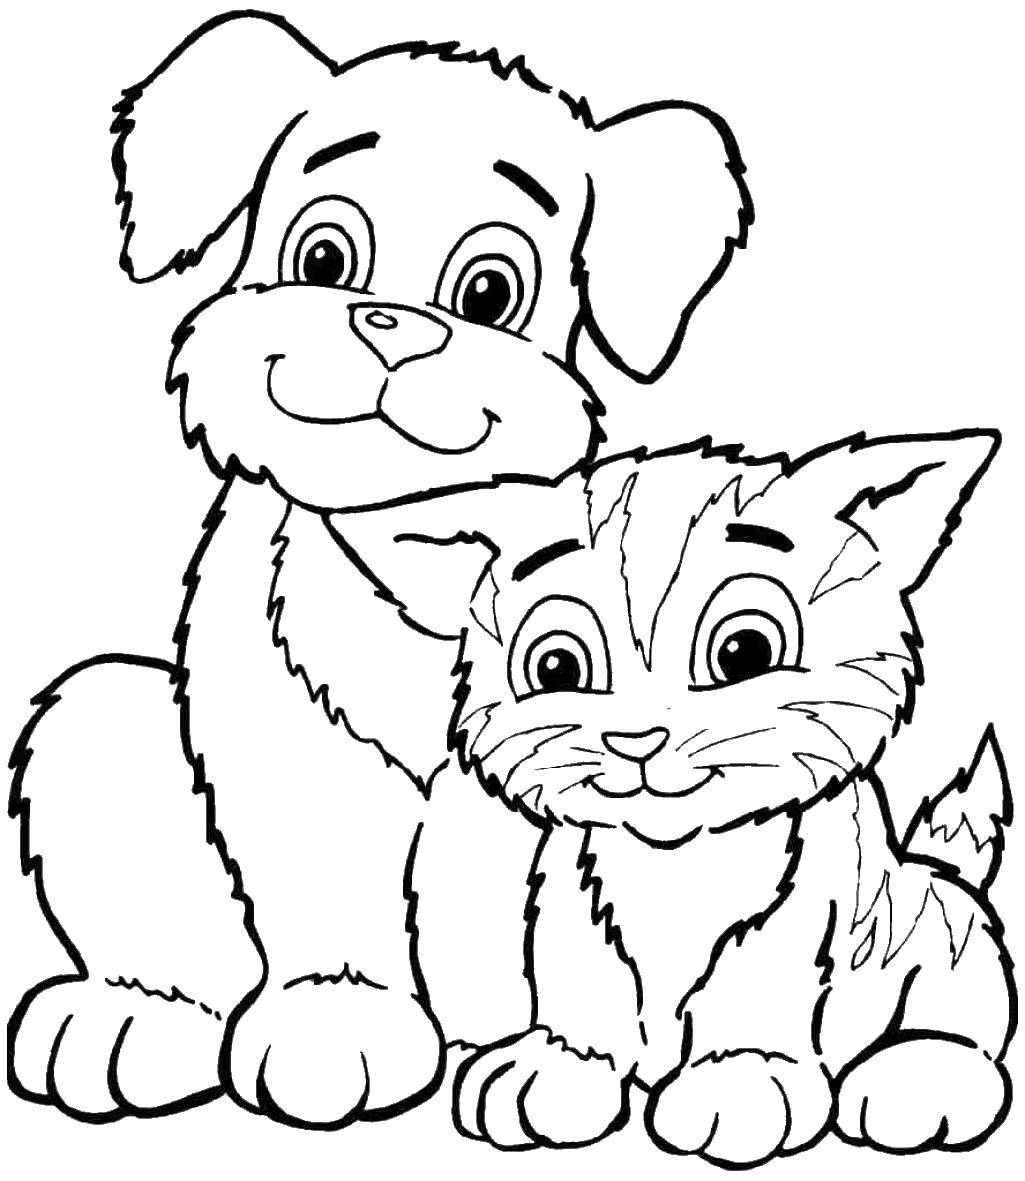 Coloring Cat and dog. Category Pets allowed. Tags:  cat, dog.